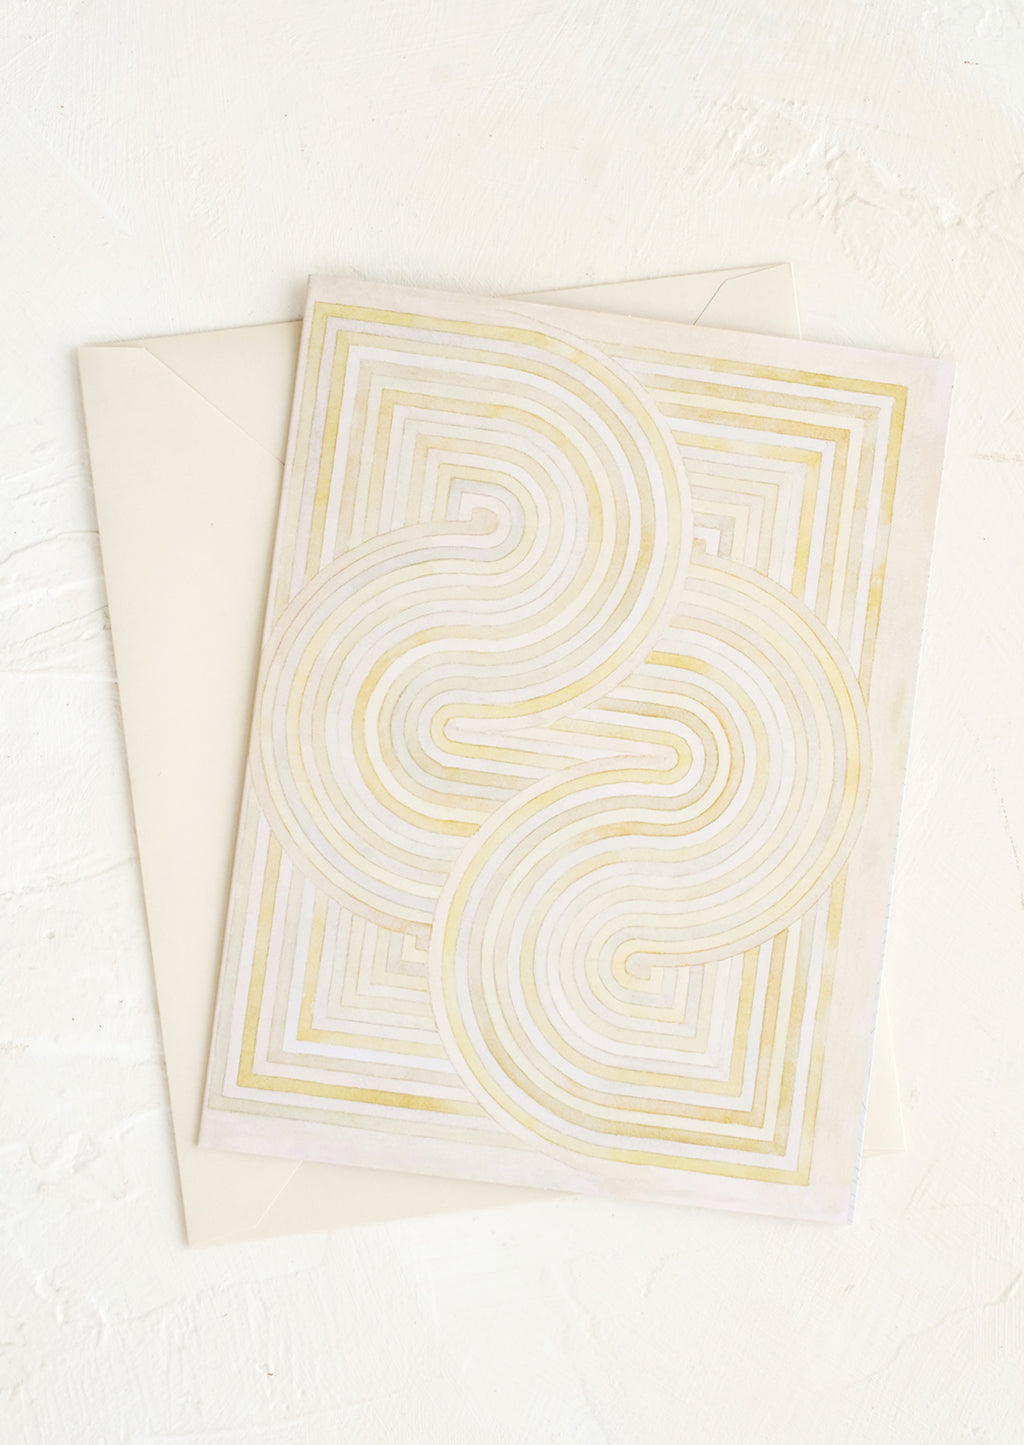 3: A notecard with pastel geometric artwork design.